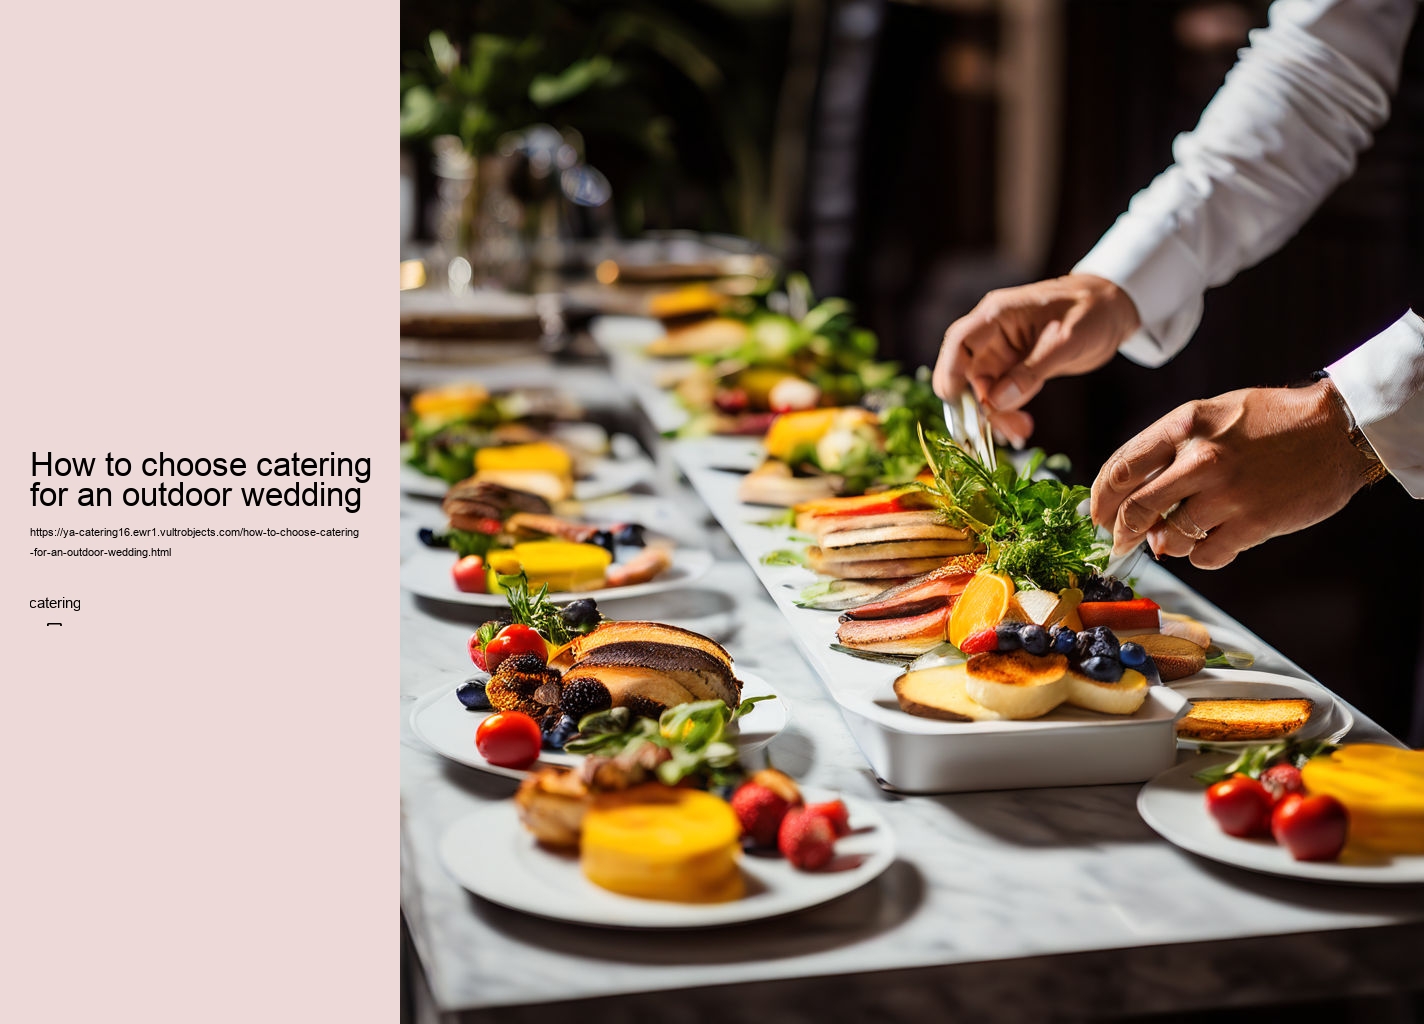 How to choose catering for an outdoor wedding